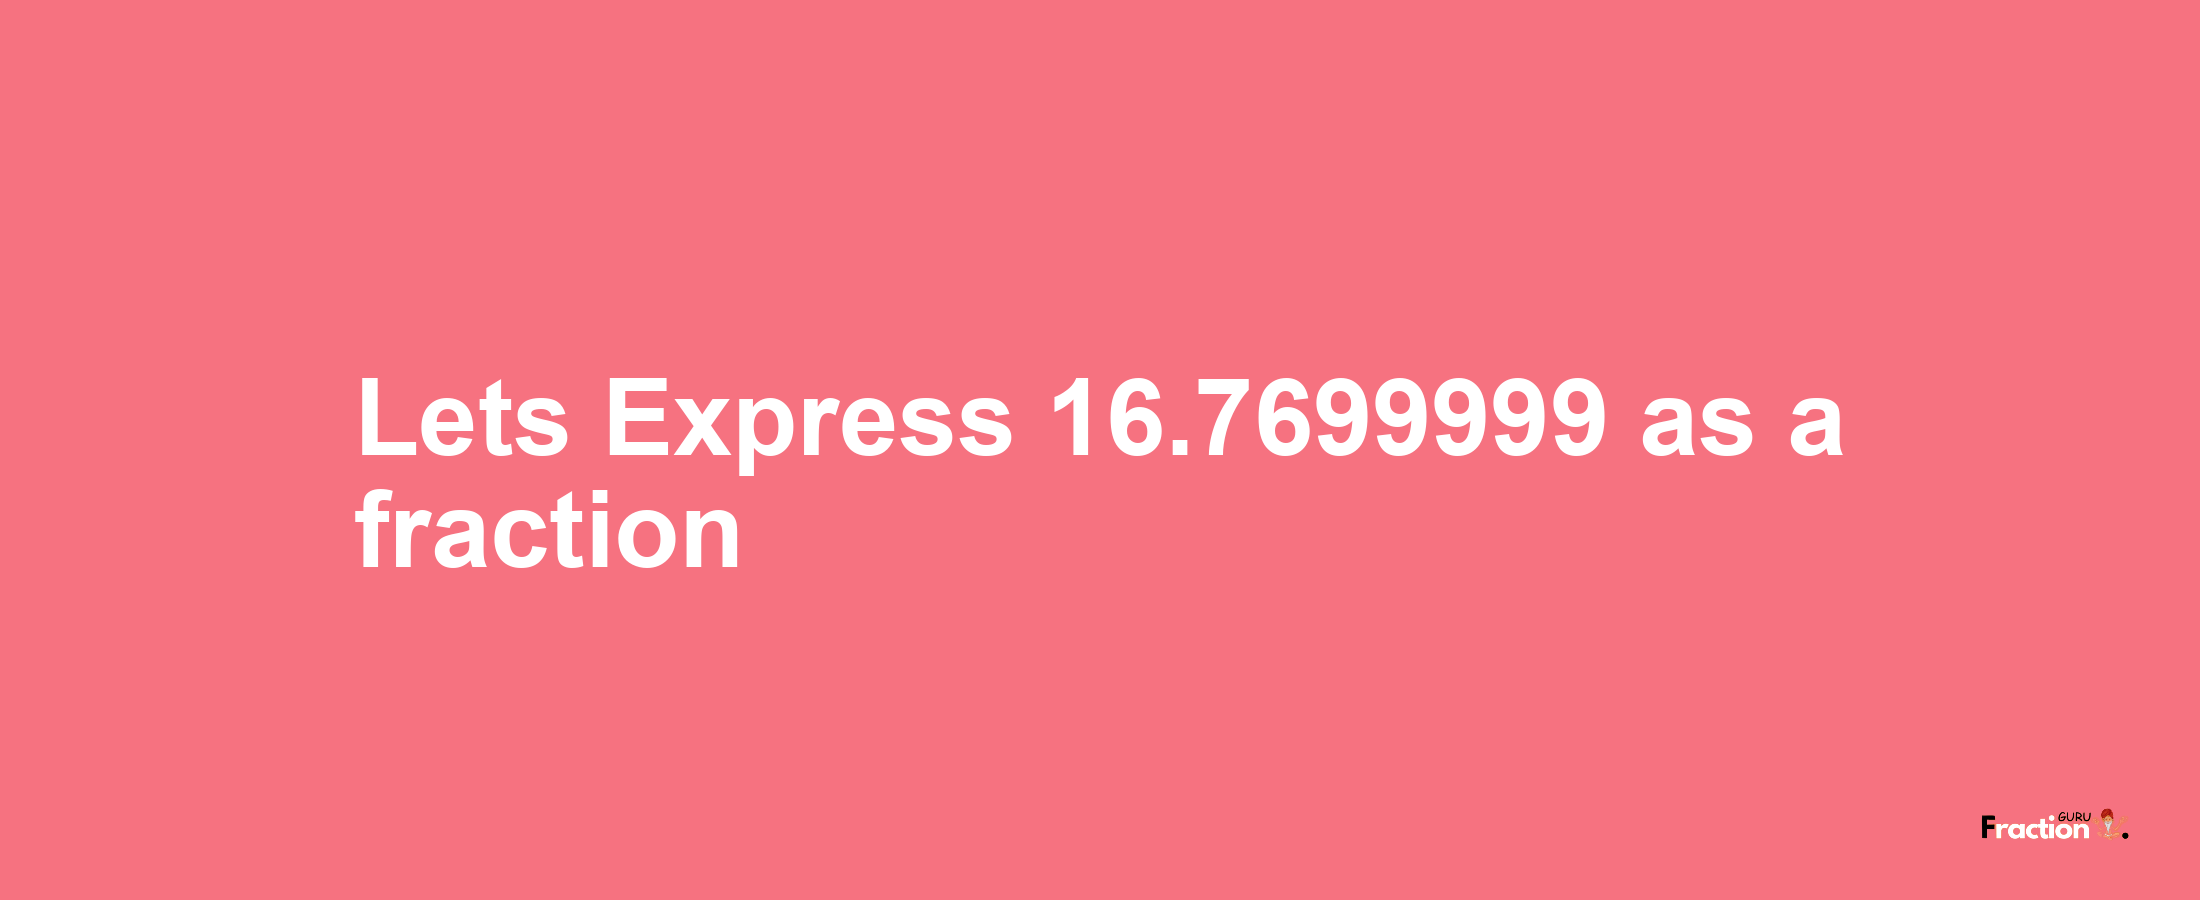 Lets Express 16.7699999 as afraction